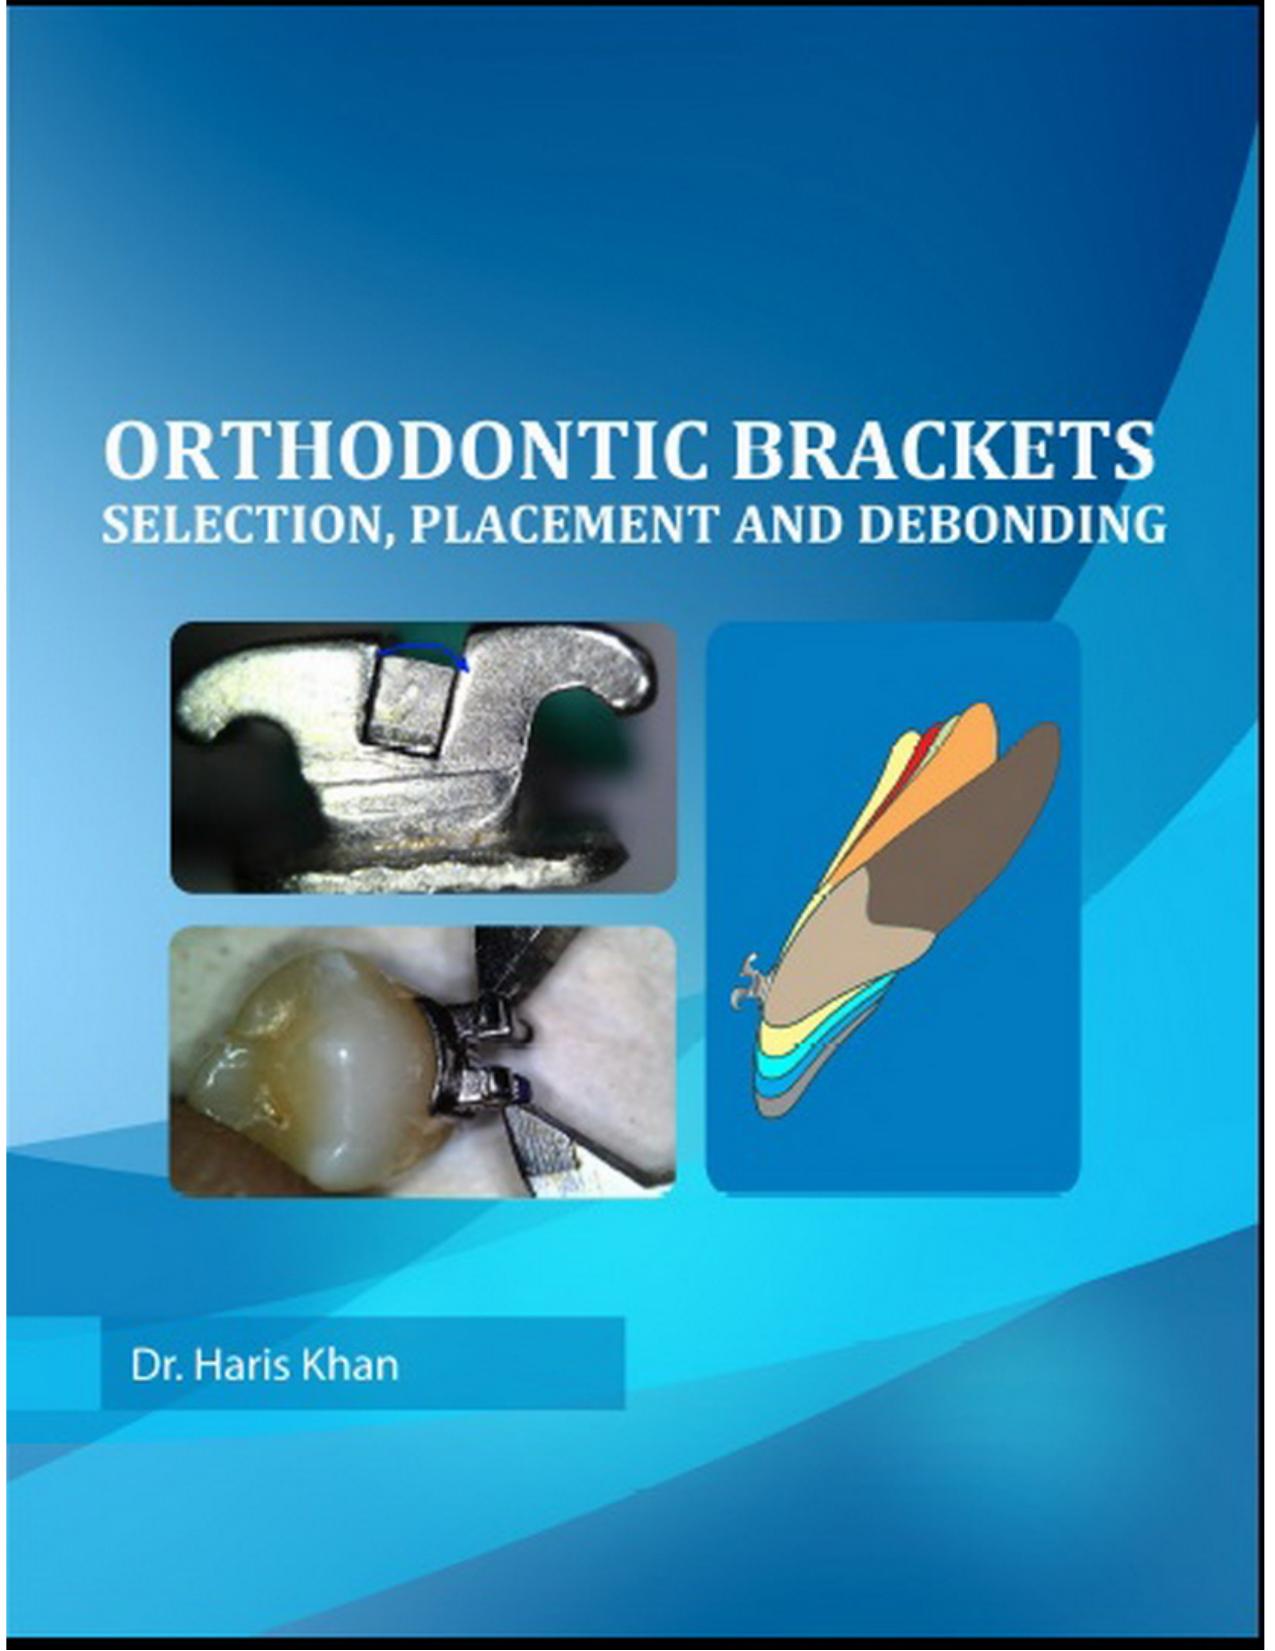 Orthodontic Brackets Selection, Placement and Debonding.jpg